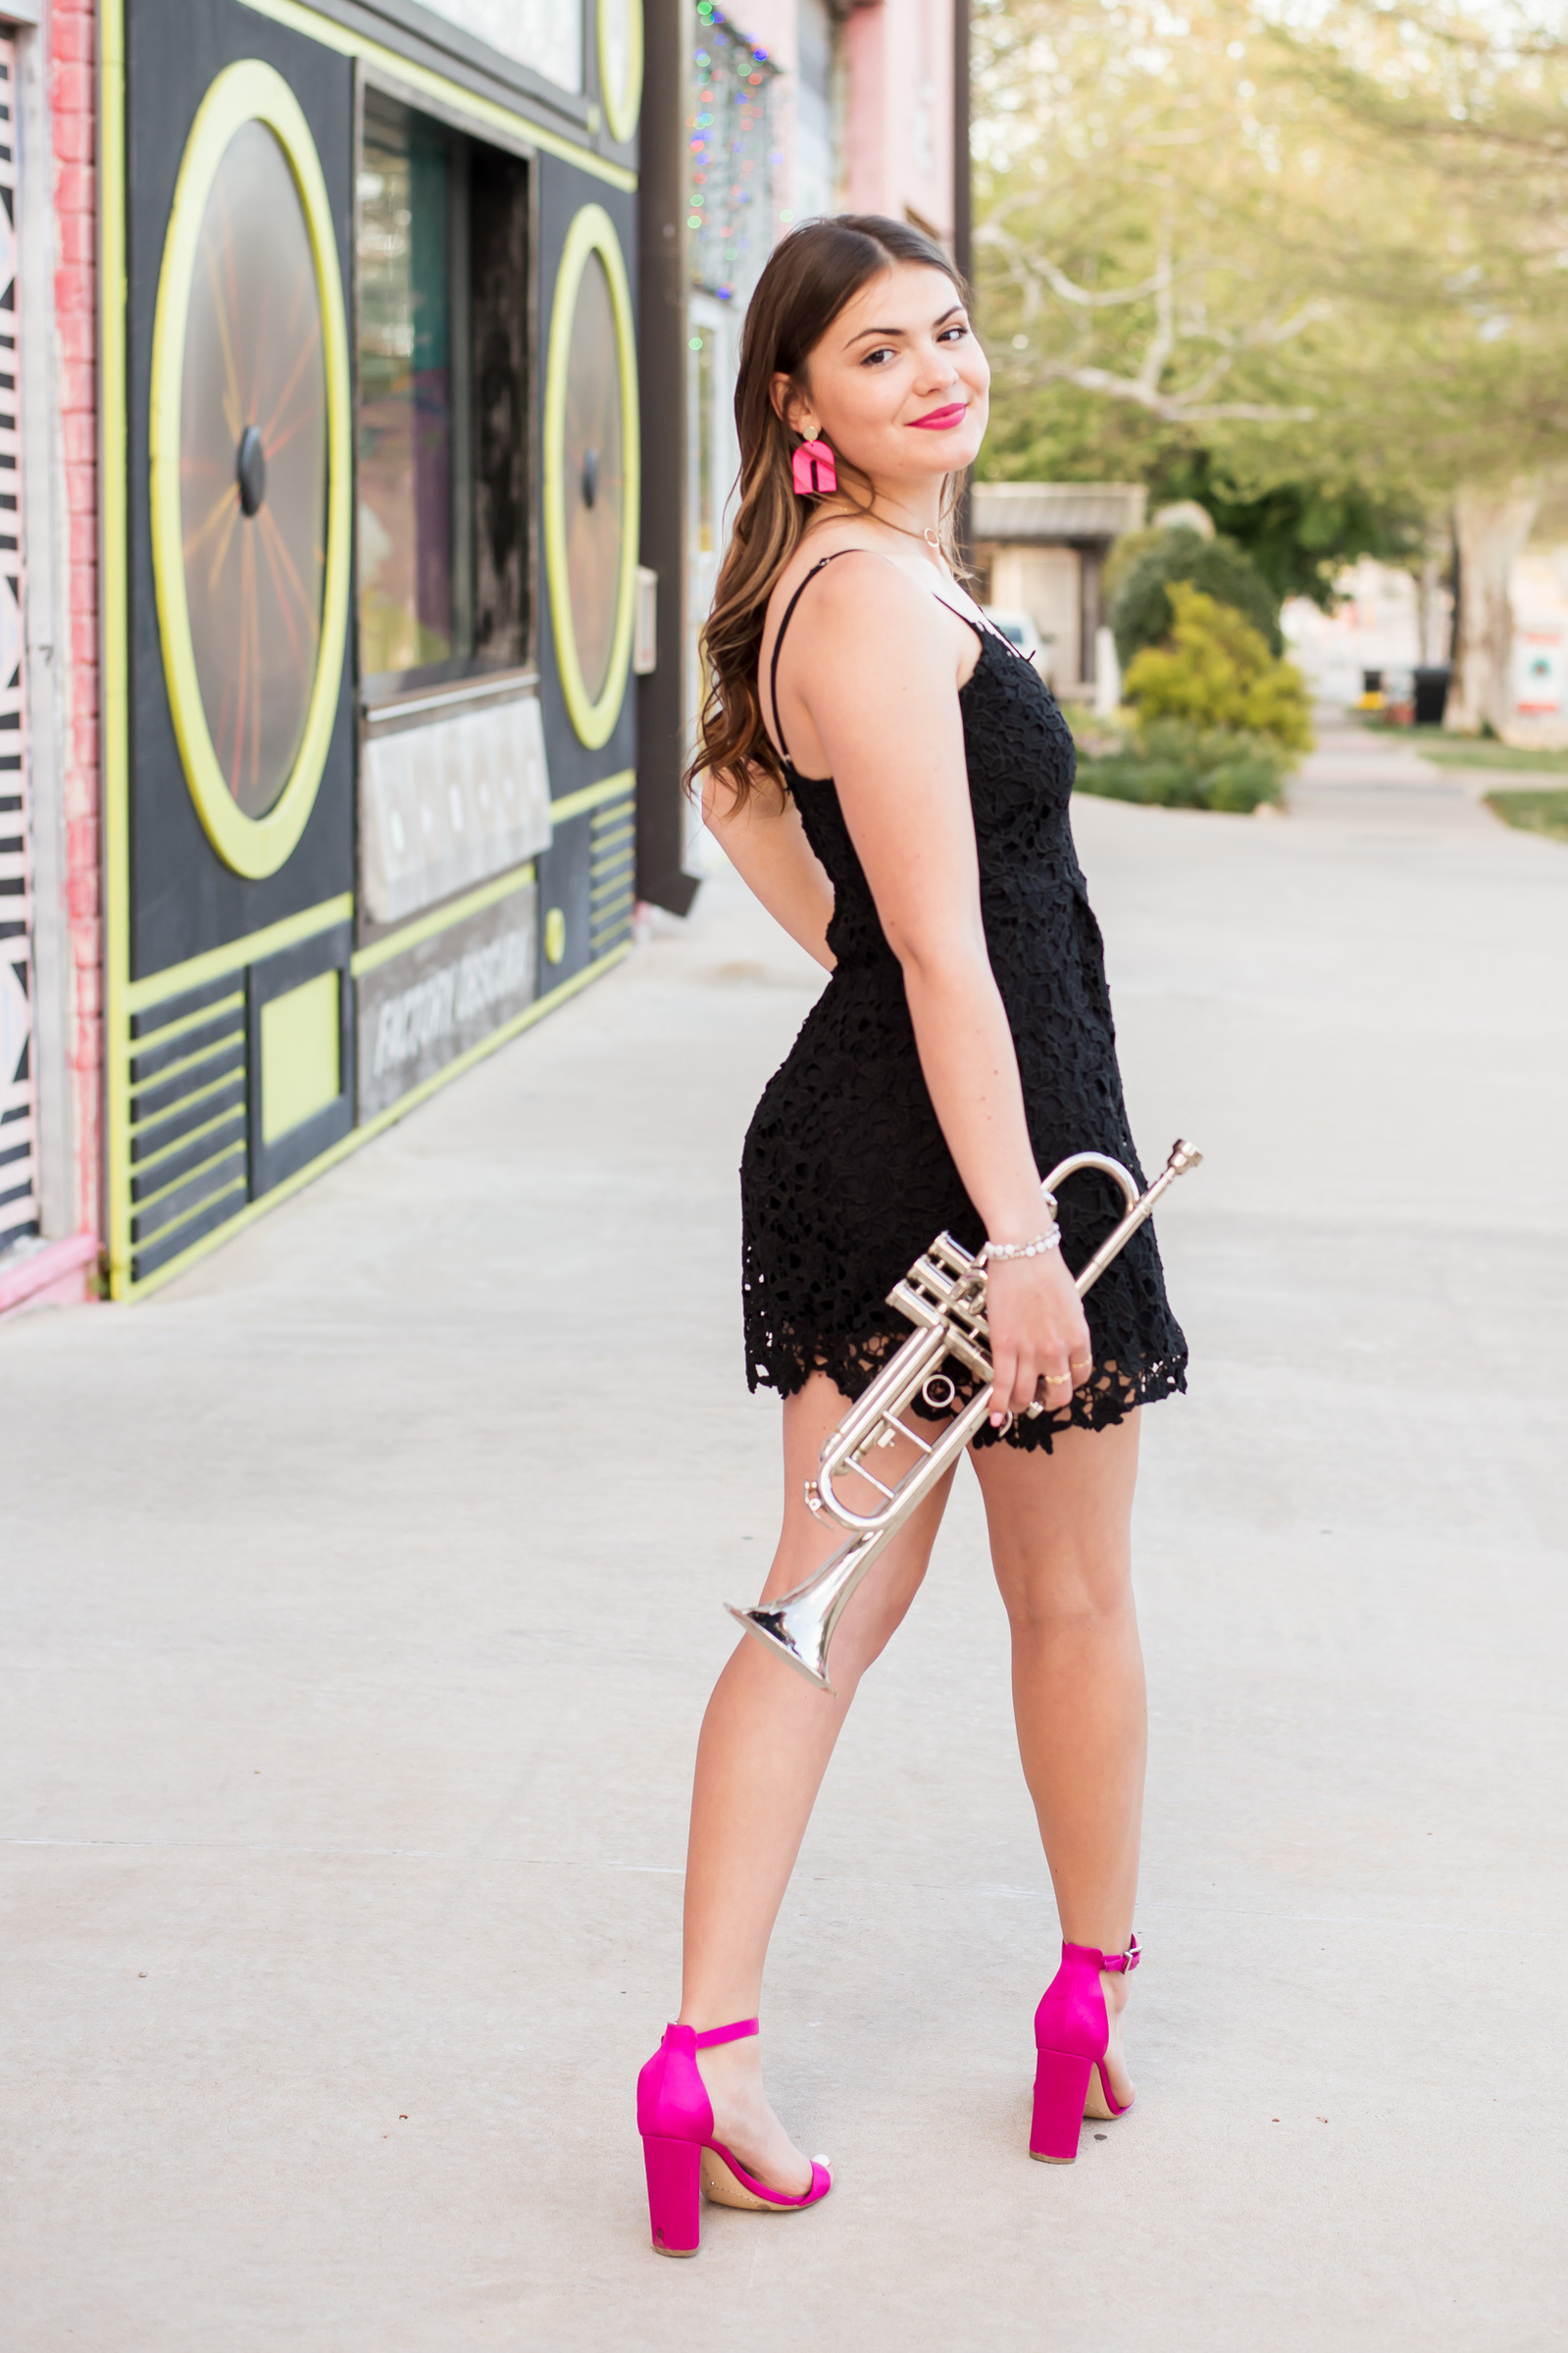 senior girl wearing a short black dress and bright pink heels looks over her shoulder holding her trumpet on a sidewalk in front of Factory Obscura in OKC